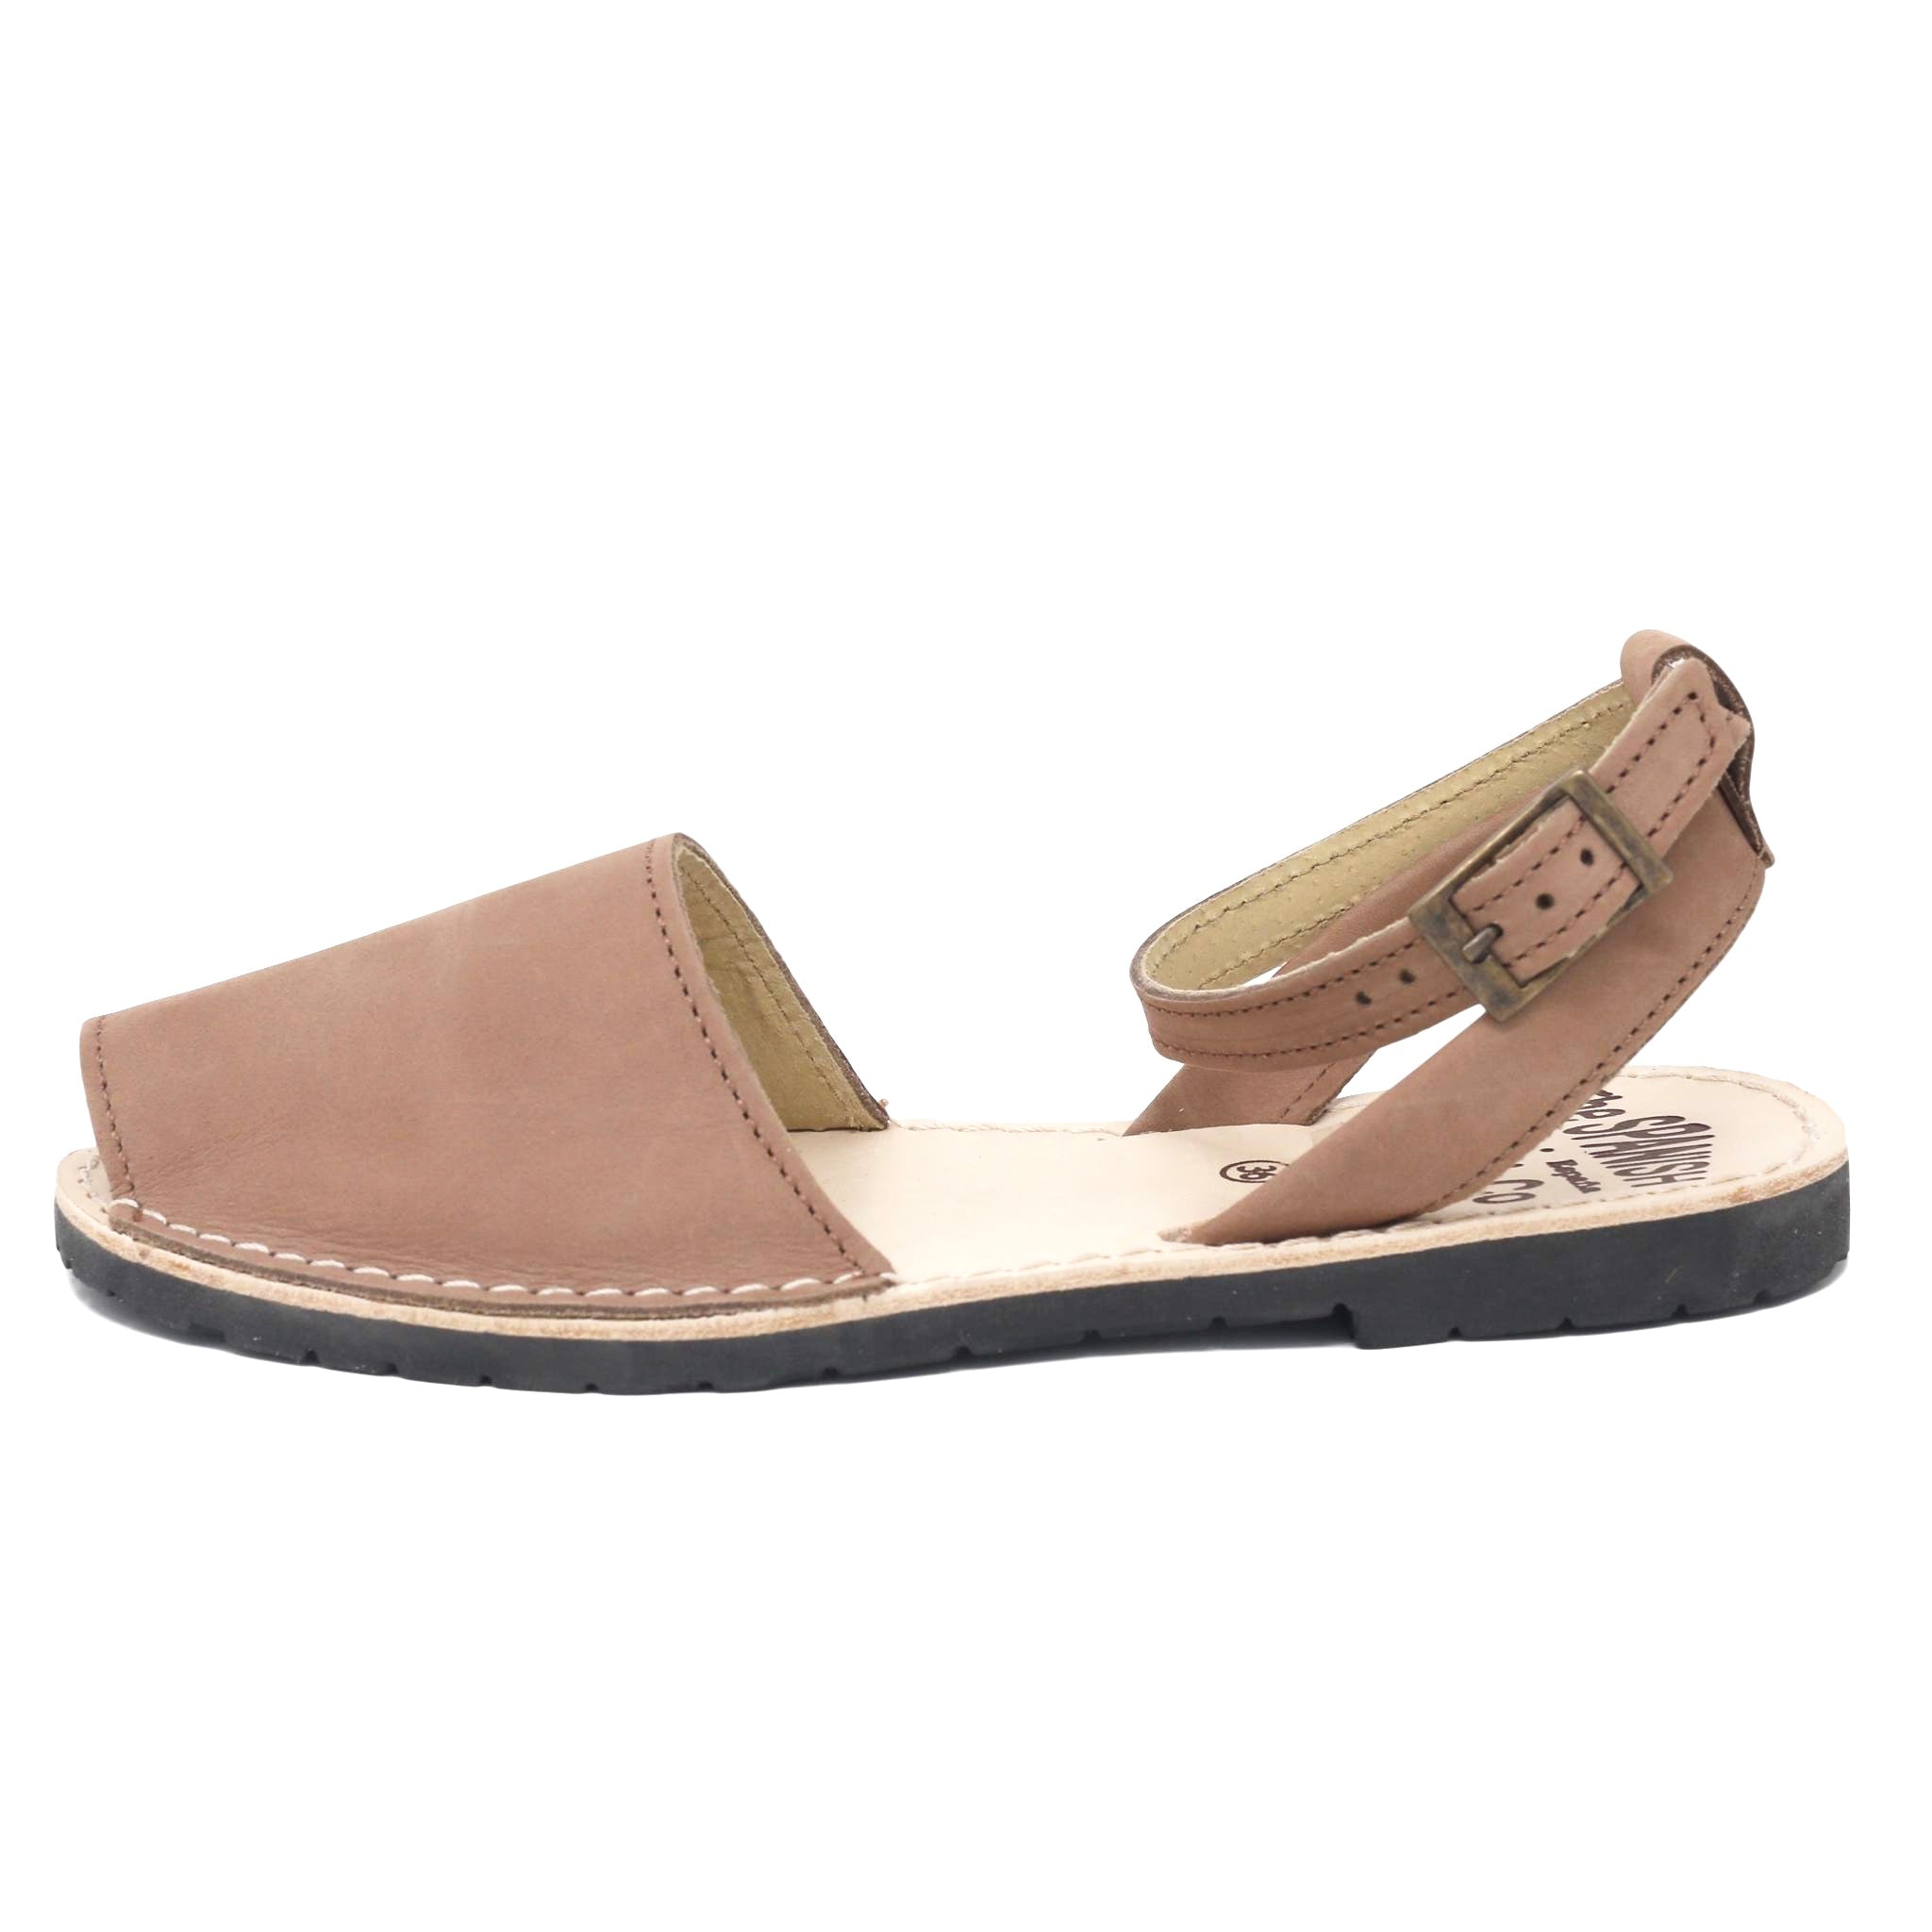 Tan nubuck sandals with strap - side view